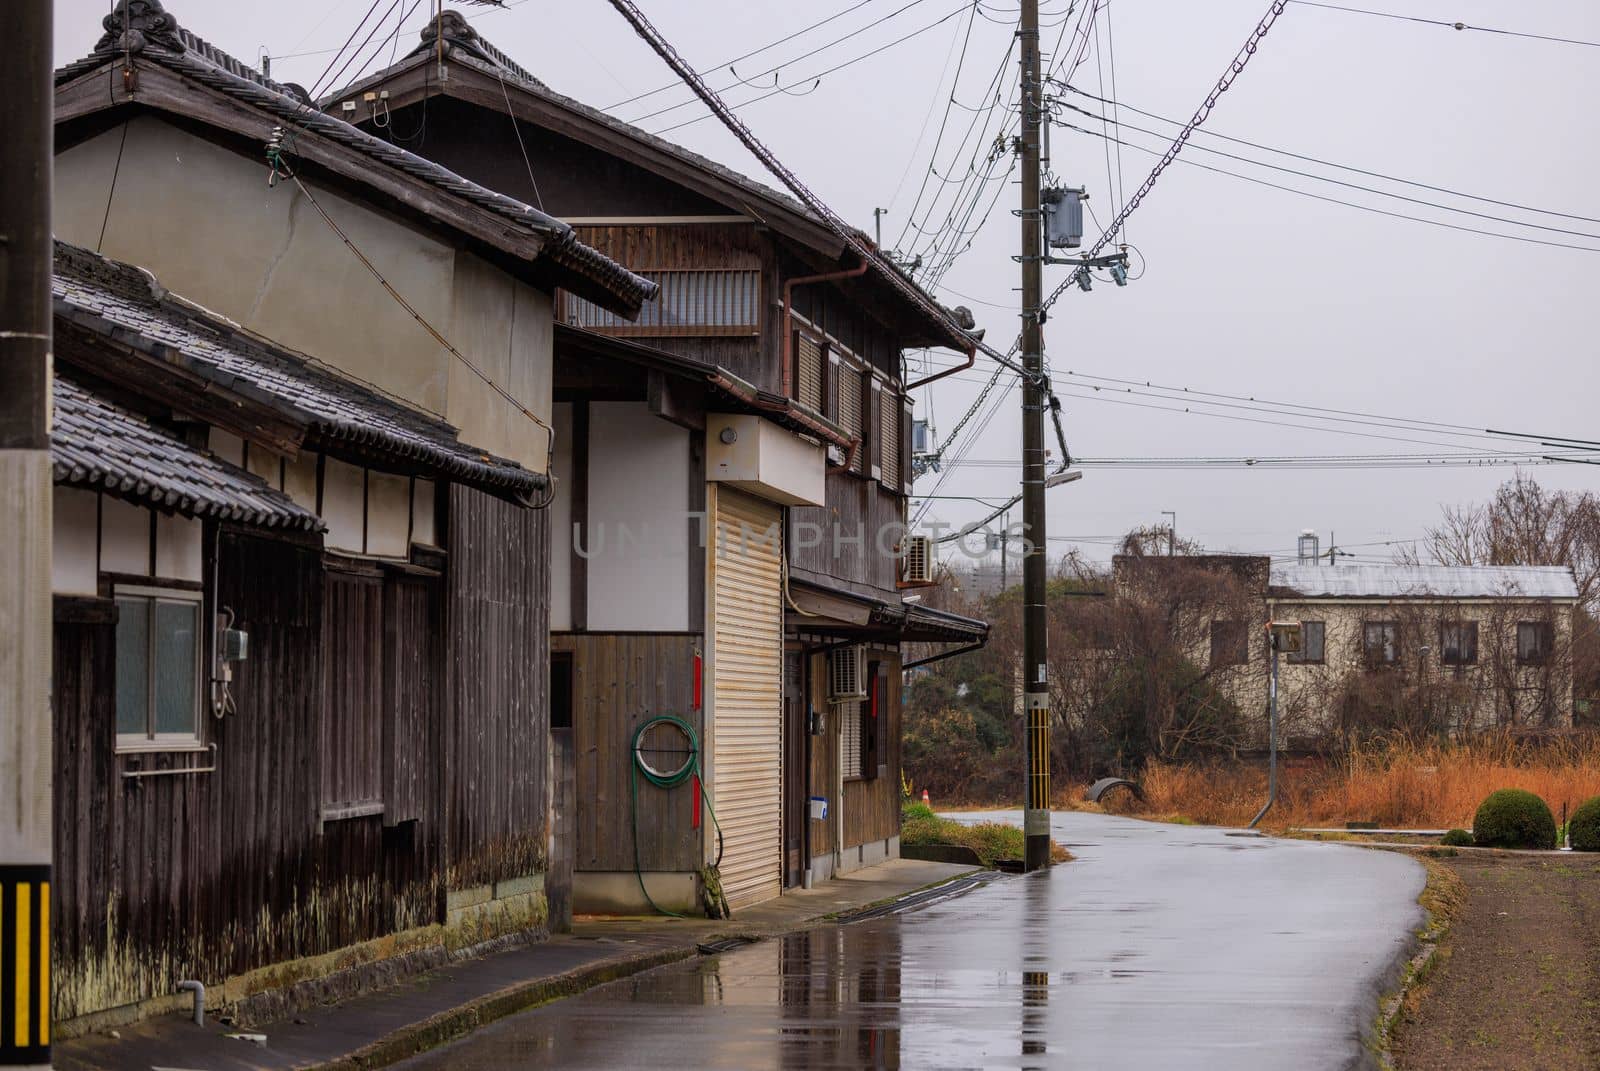 Old wooden Japanese house in rural village on a rainy day. High quality photo